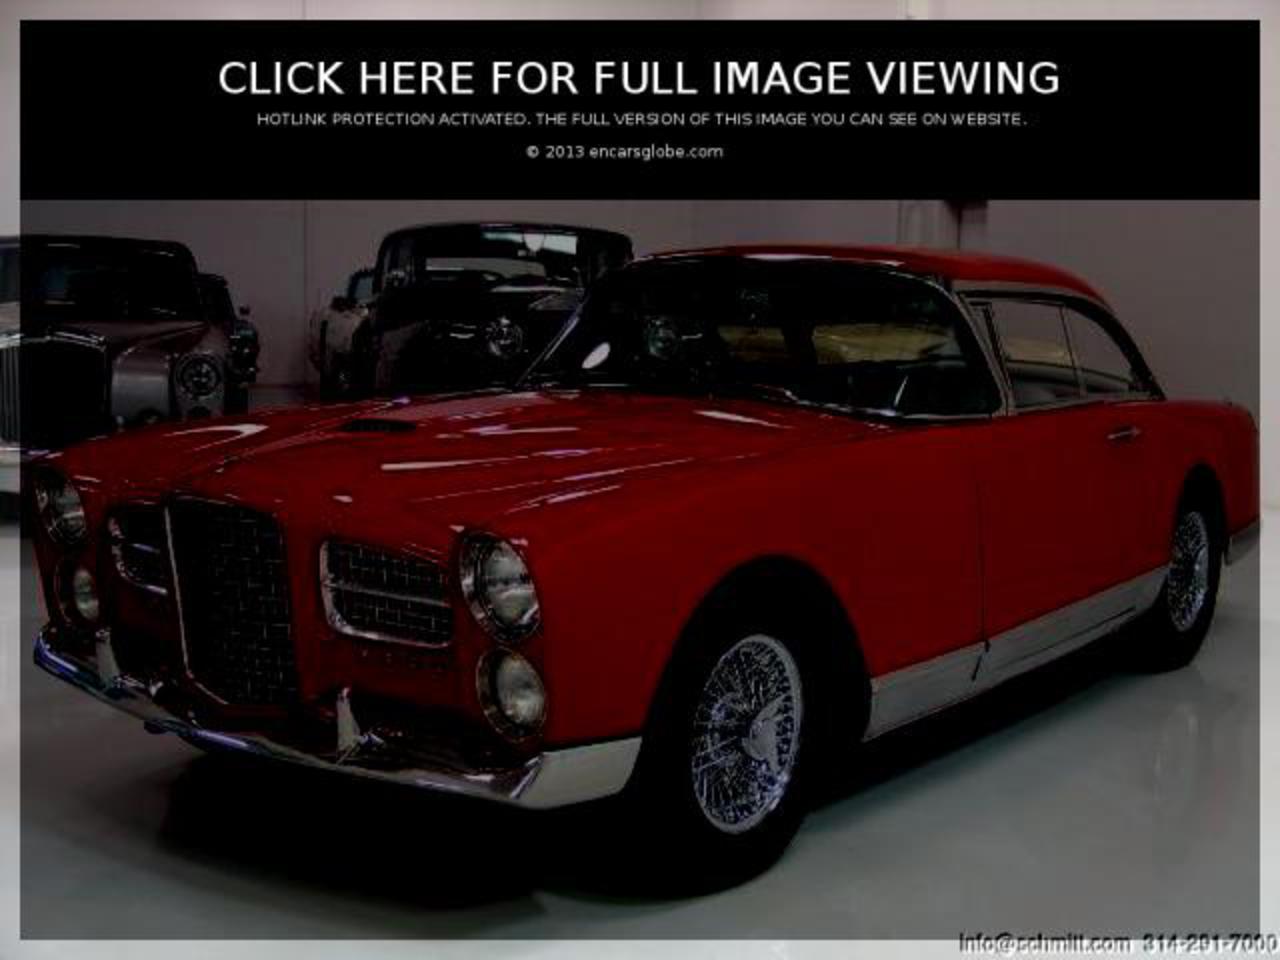 Facel Vega Typhoon Photo Gallery: Photo #05 out of 9, Image Size ...